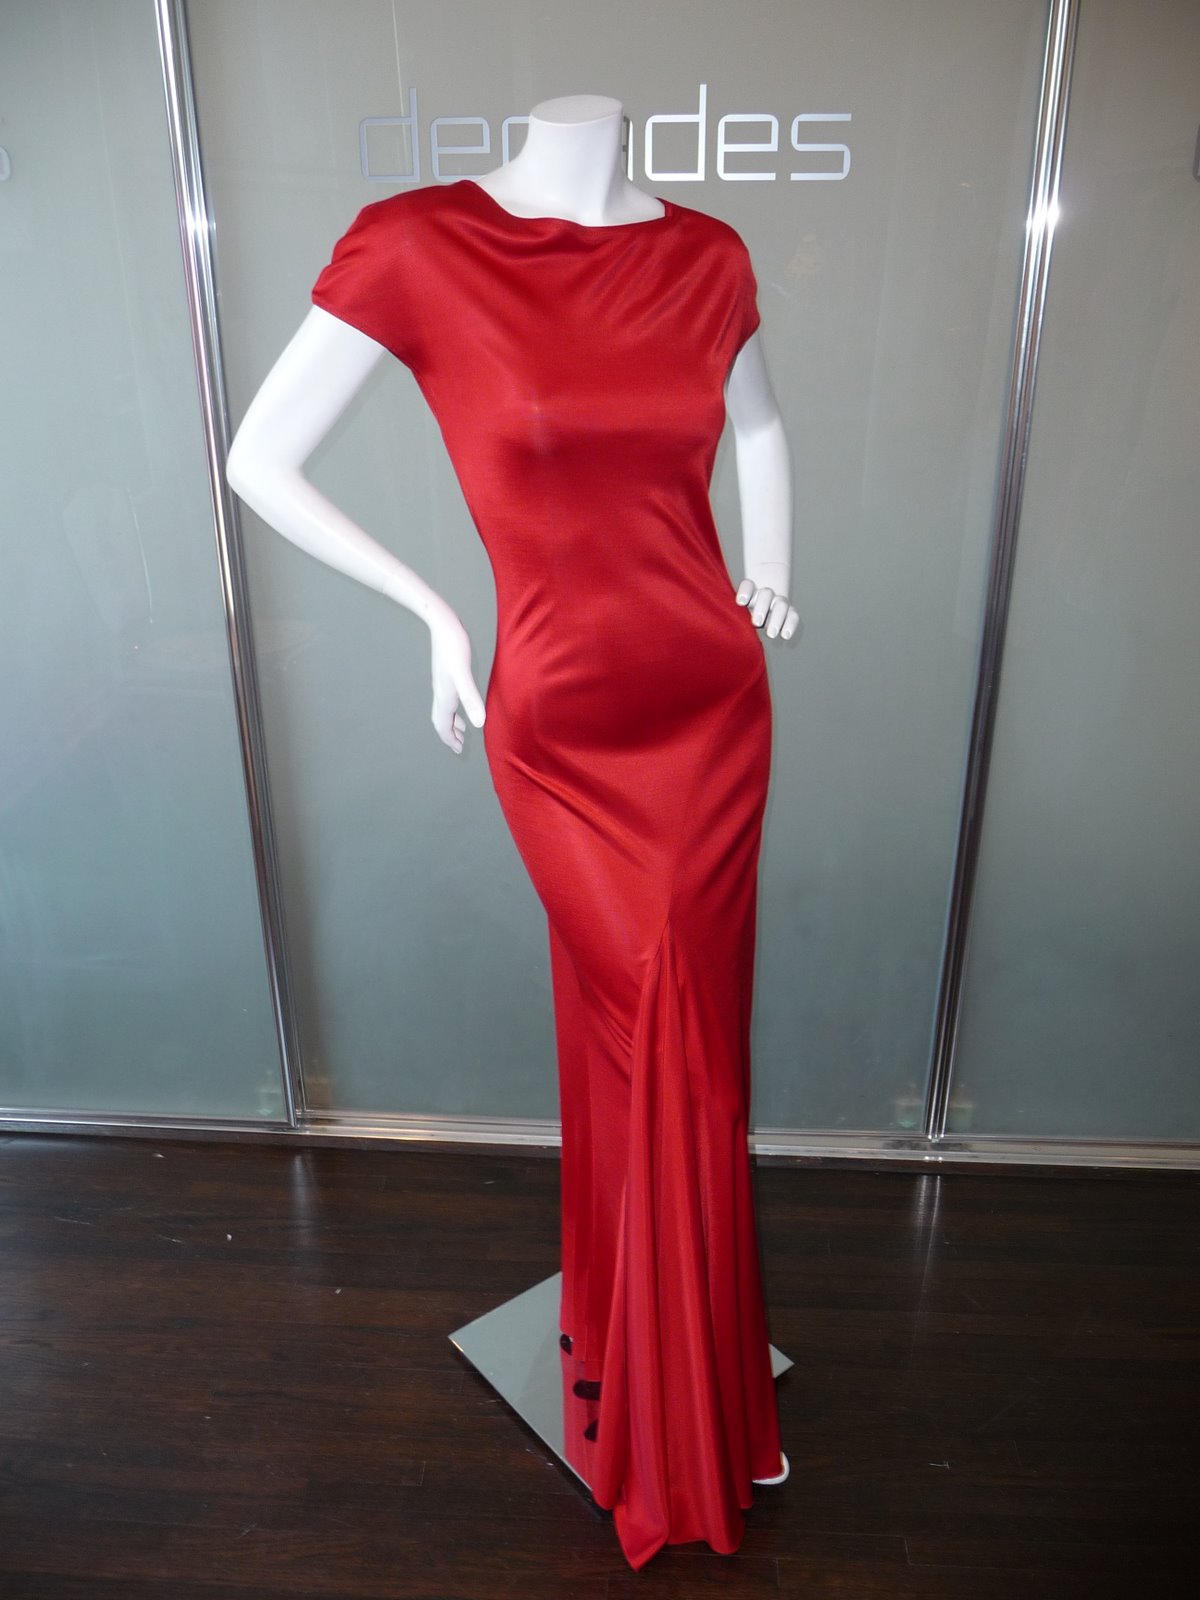 [CLAUDE+MONTANA+EARLY+80S+RED+VISCOSE+CRISS+CROSS+BACKLESS+DRESS+WITH+DRAMATIC+SEAMING+AND+FRONT+FISHTAIL+SWAG.JPG.JPG]